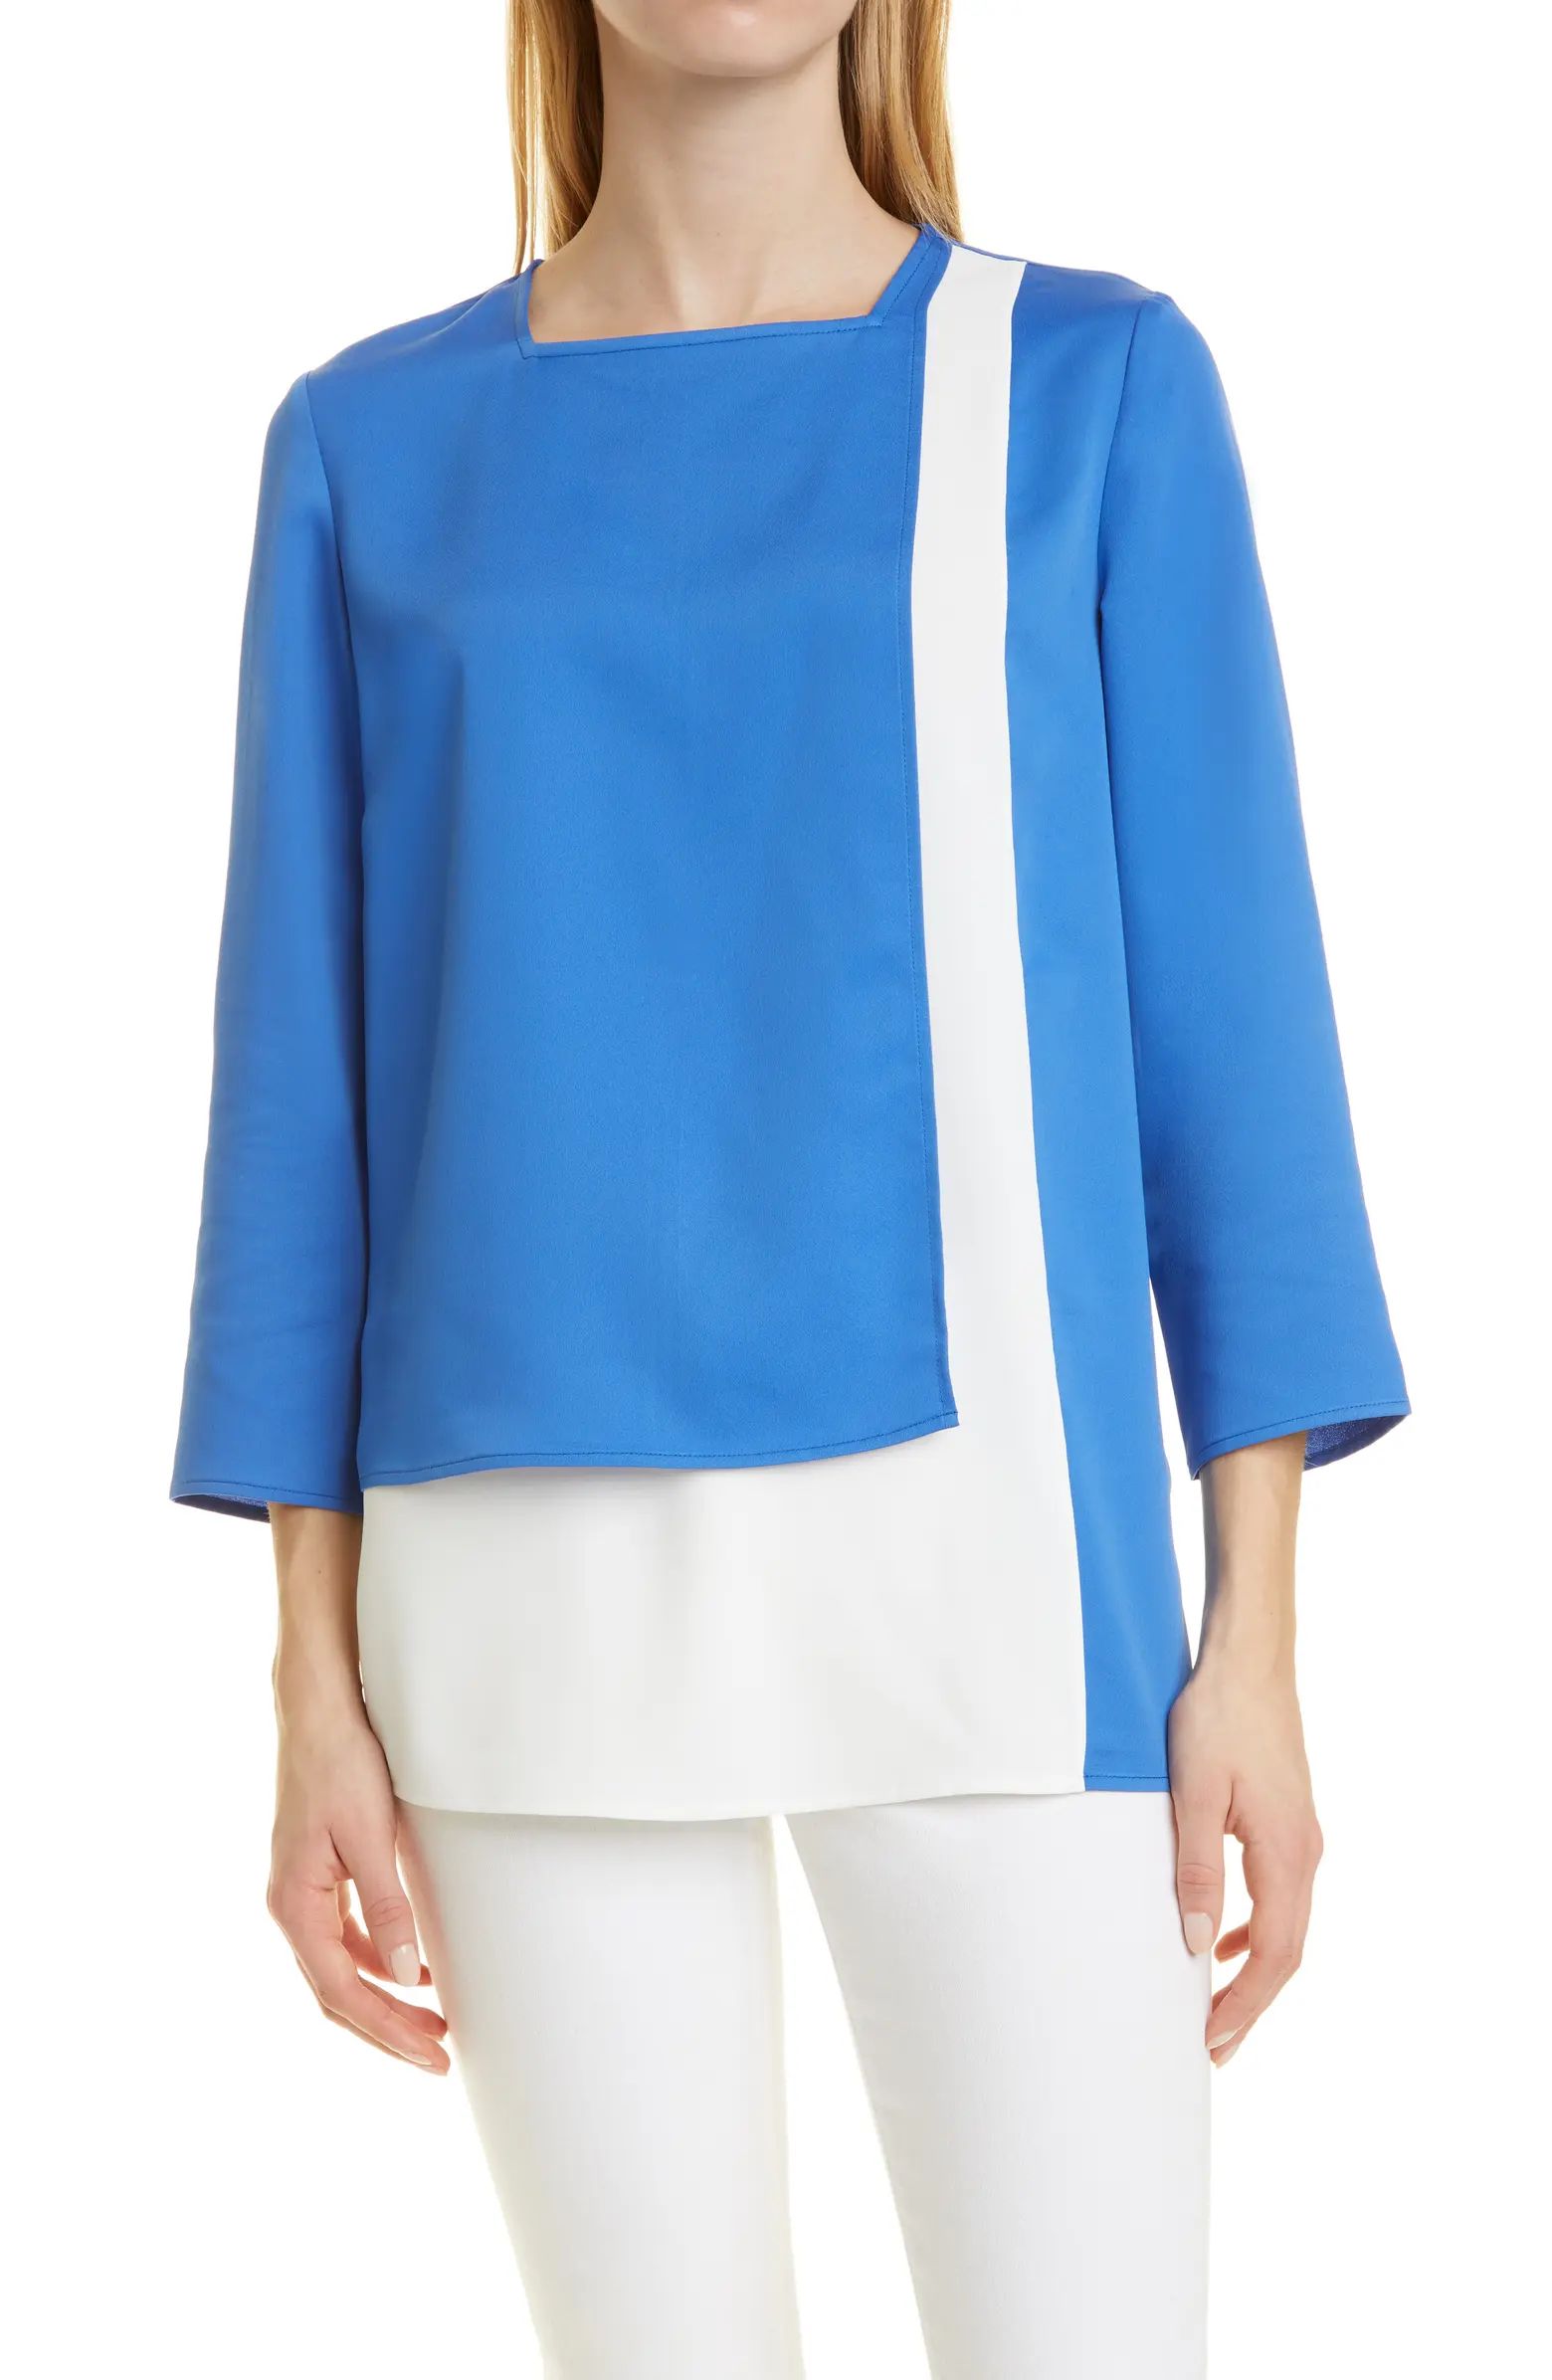 Misook Layered Colorblock Panel Tunic | Nordstrom | Nordstrom